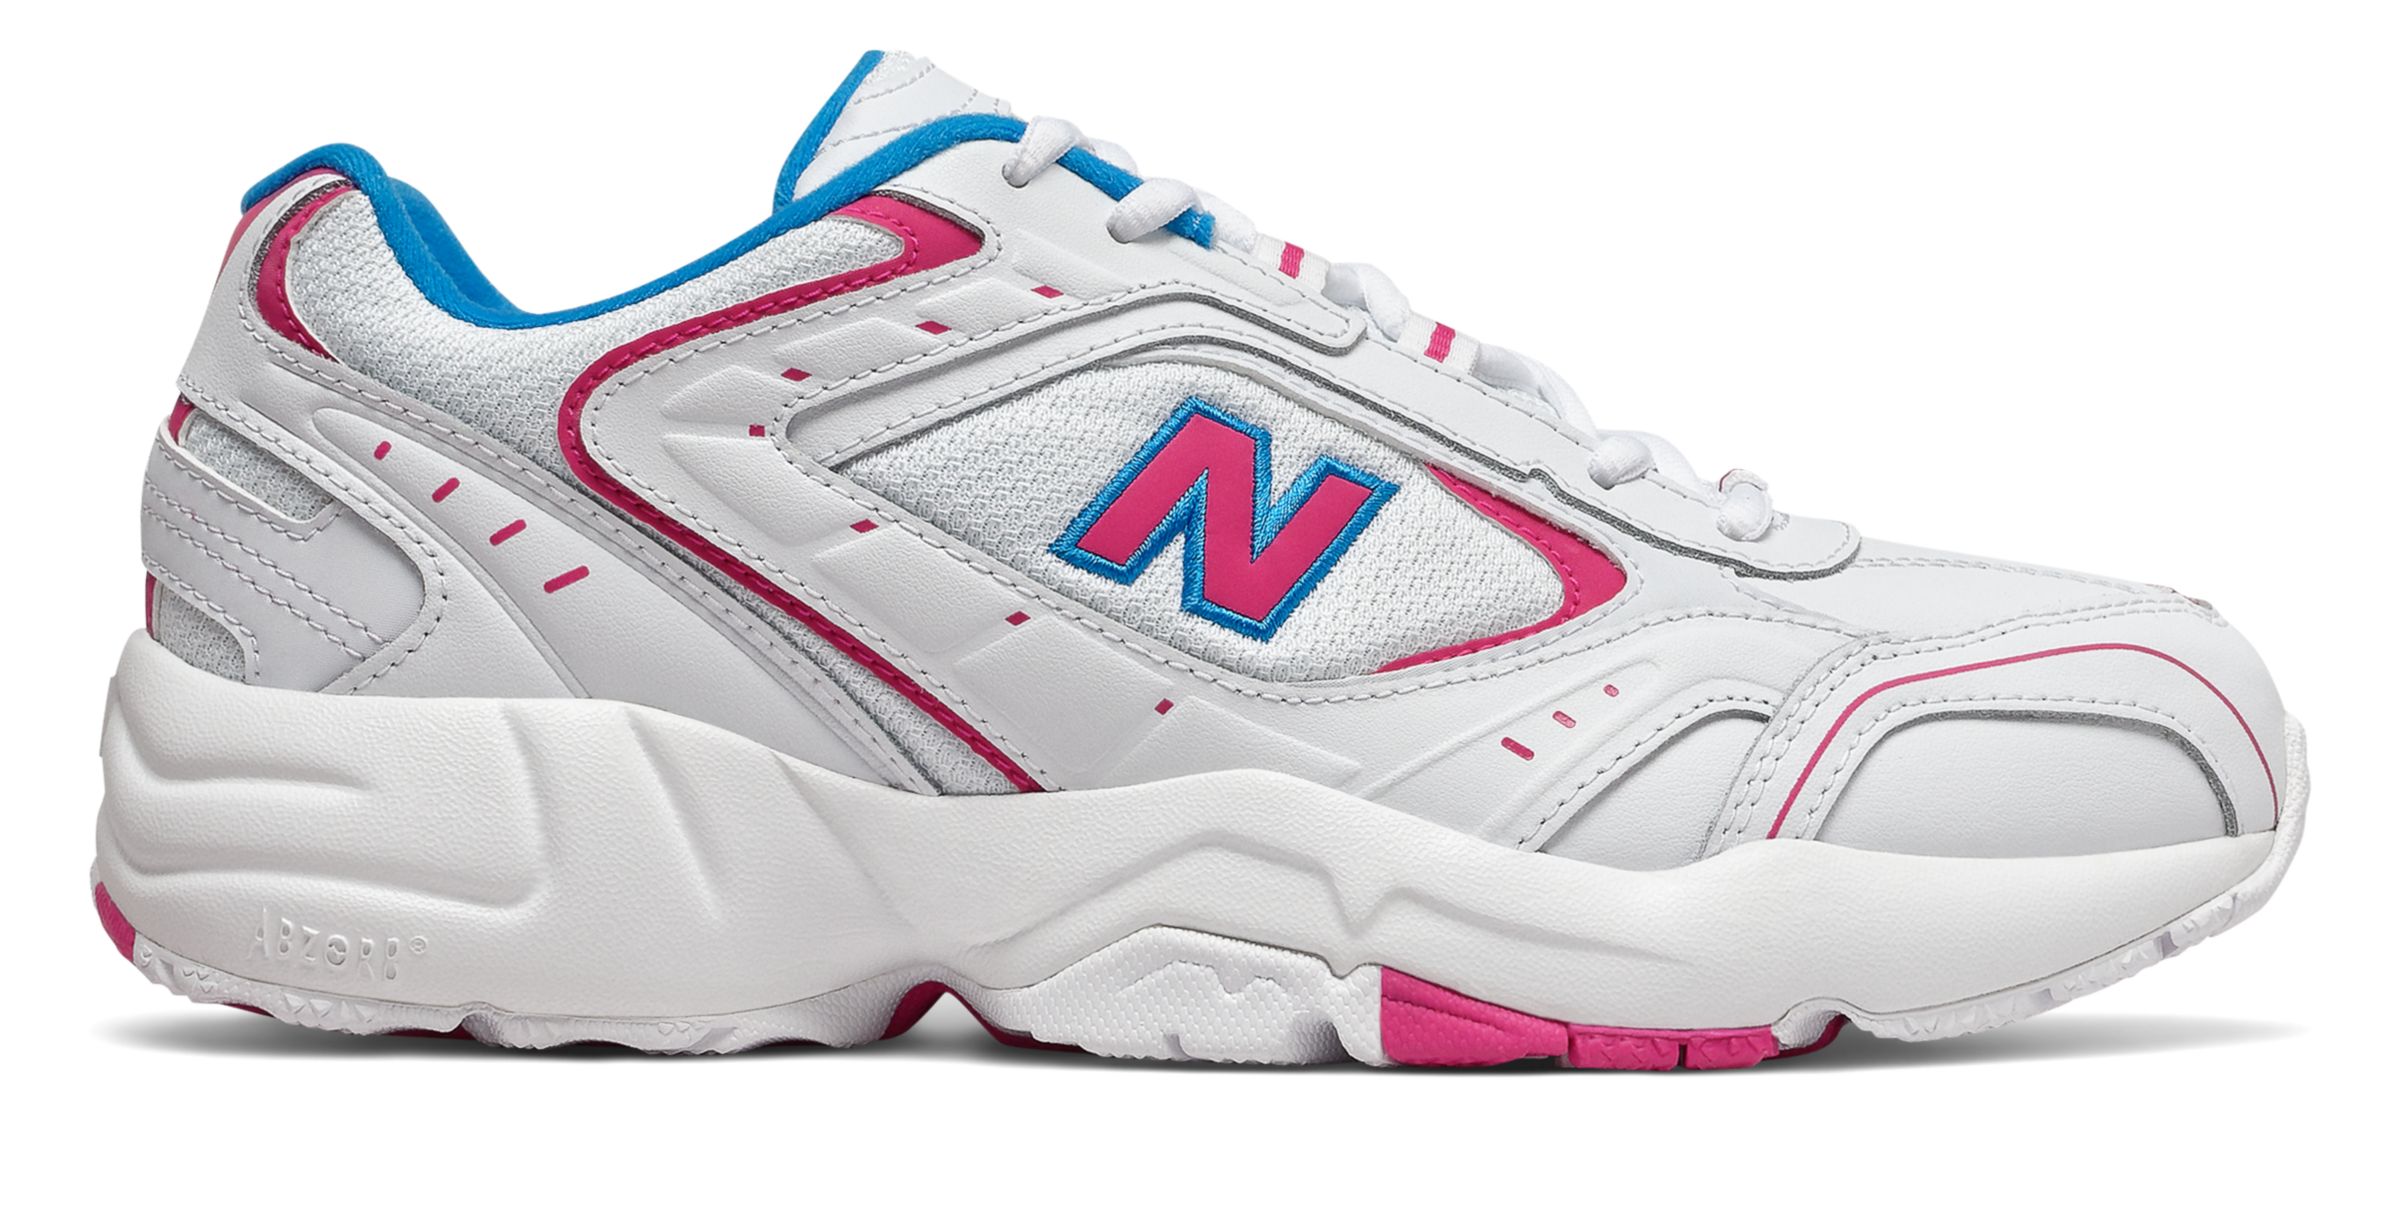 Daily Deal - Daily Discounts on New Balance Shoes | Joe's New Balance  Outlet Online